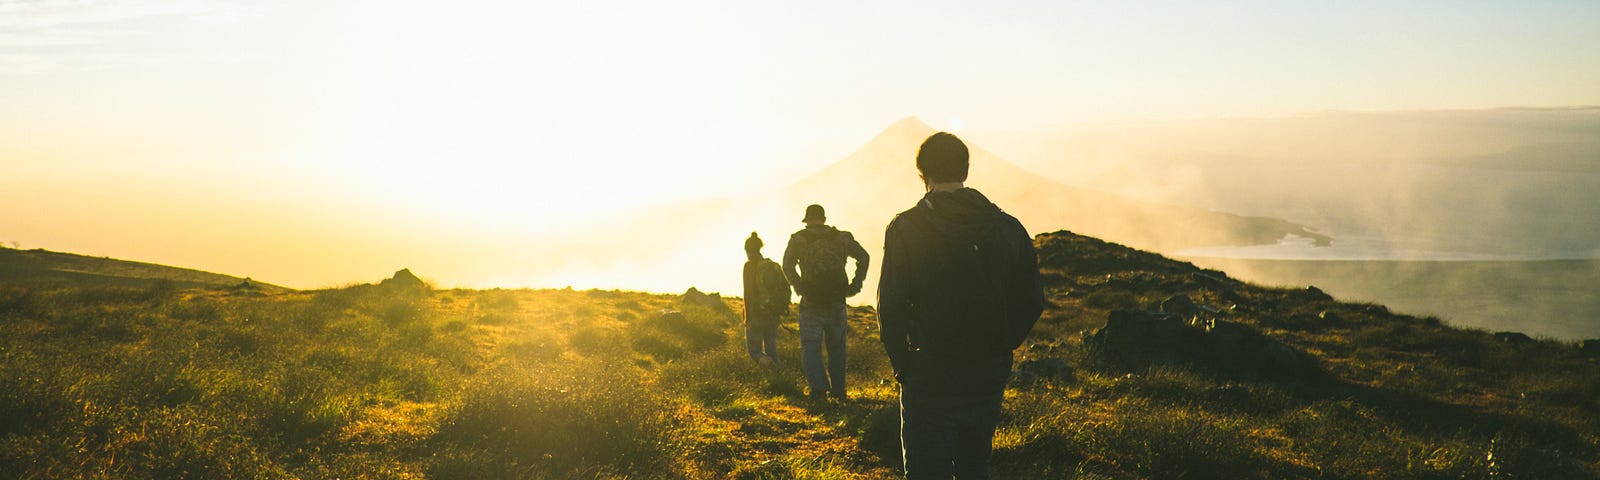 An image of three hikers walking up a mountain towards the sun.